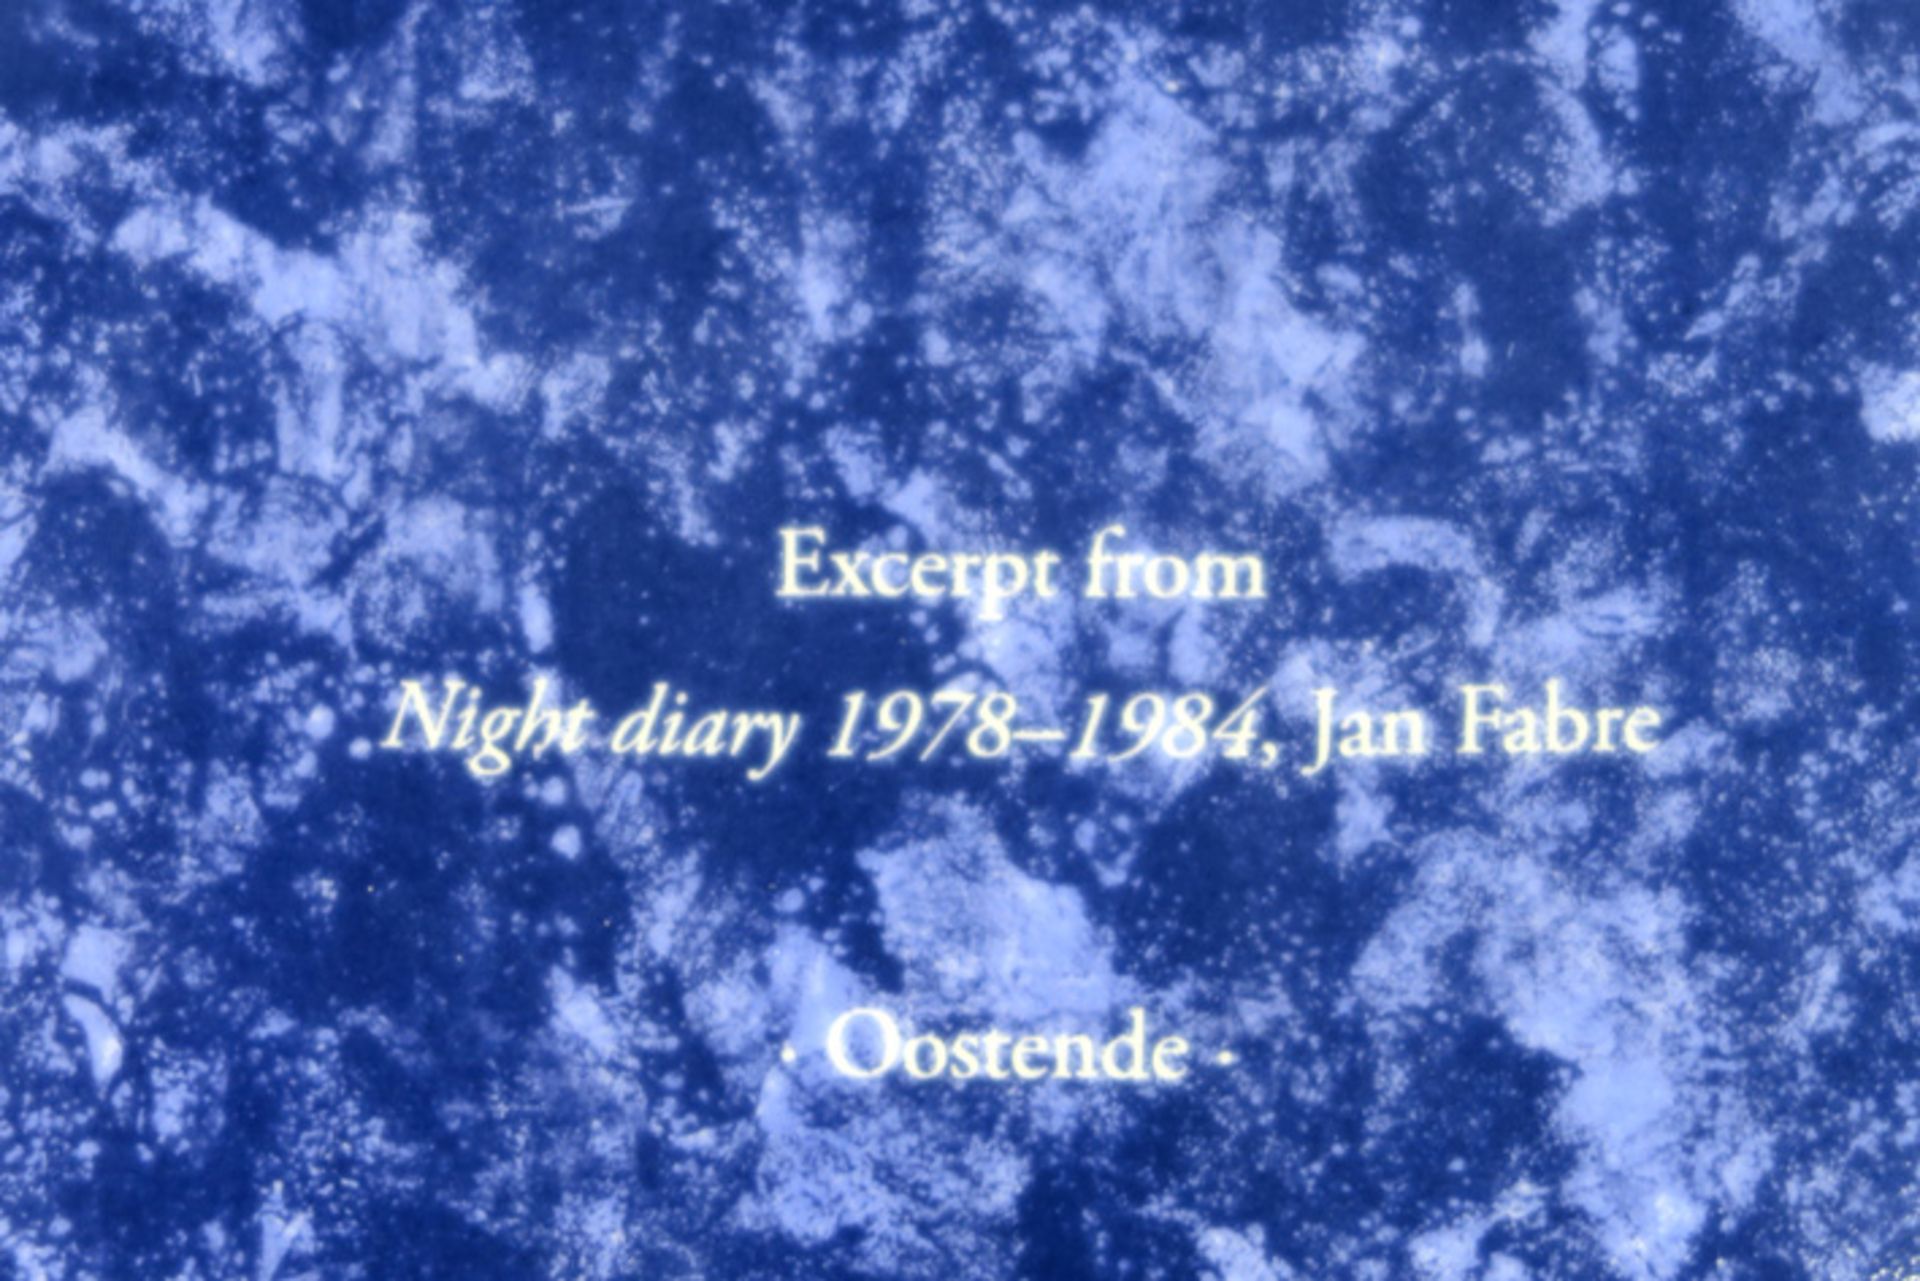 Jan Fabre "My Catechism" plate in porcelain, marked on the back "Excerpt from Night Diary 1978 - - Image 4 of 4